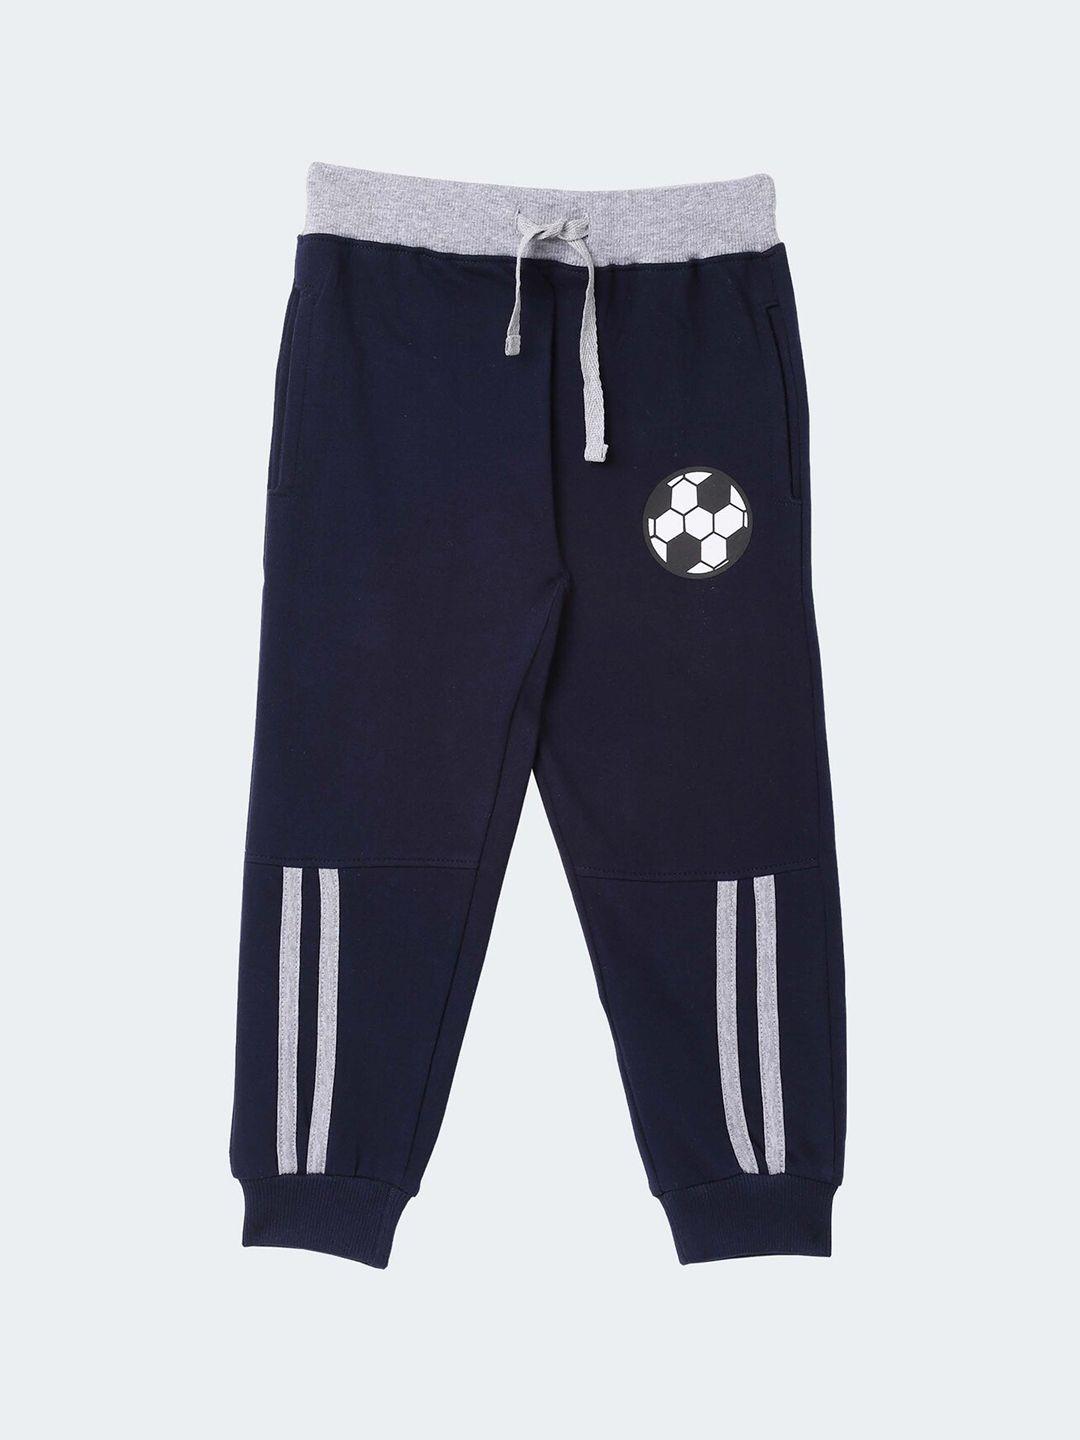 r&b boys navy blue solid cotton joggers